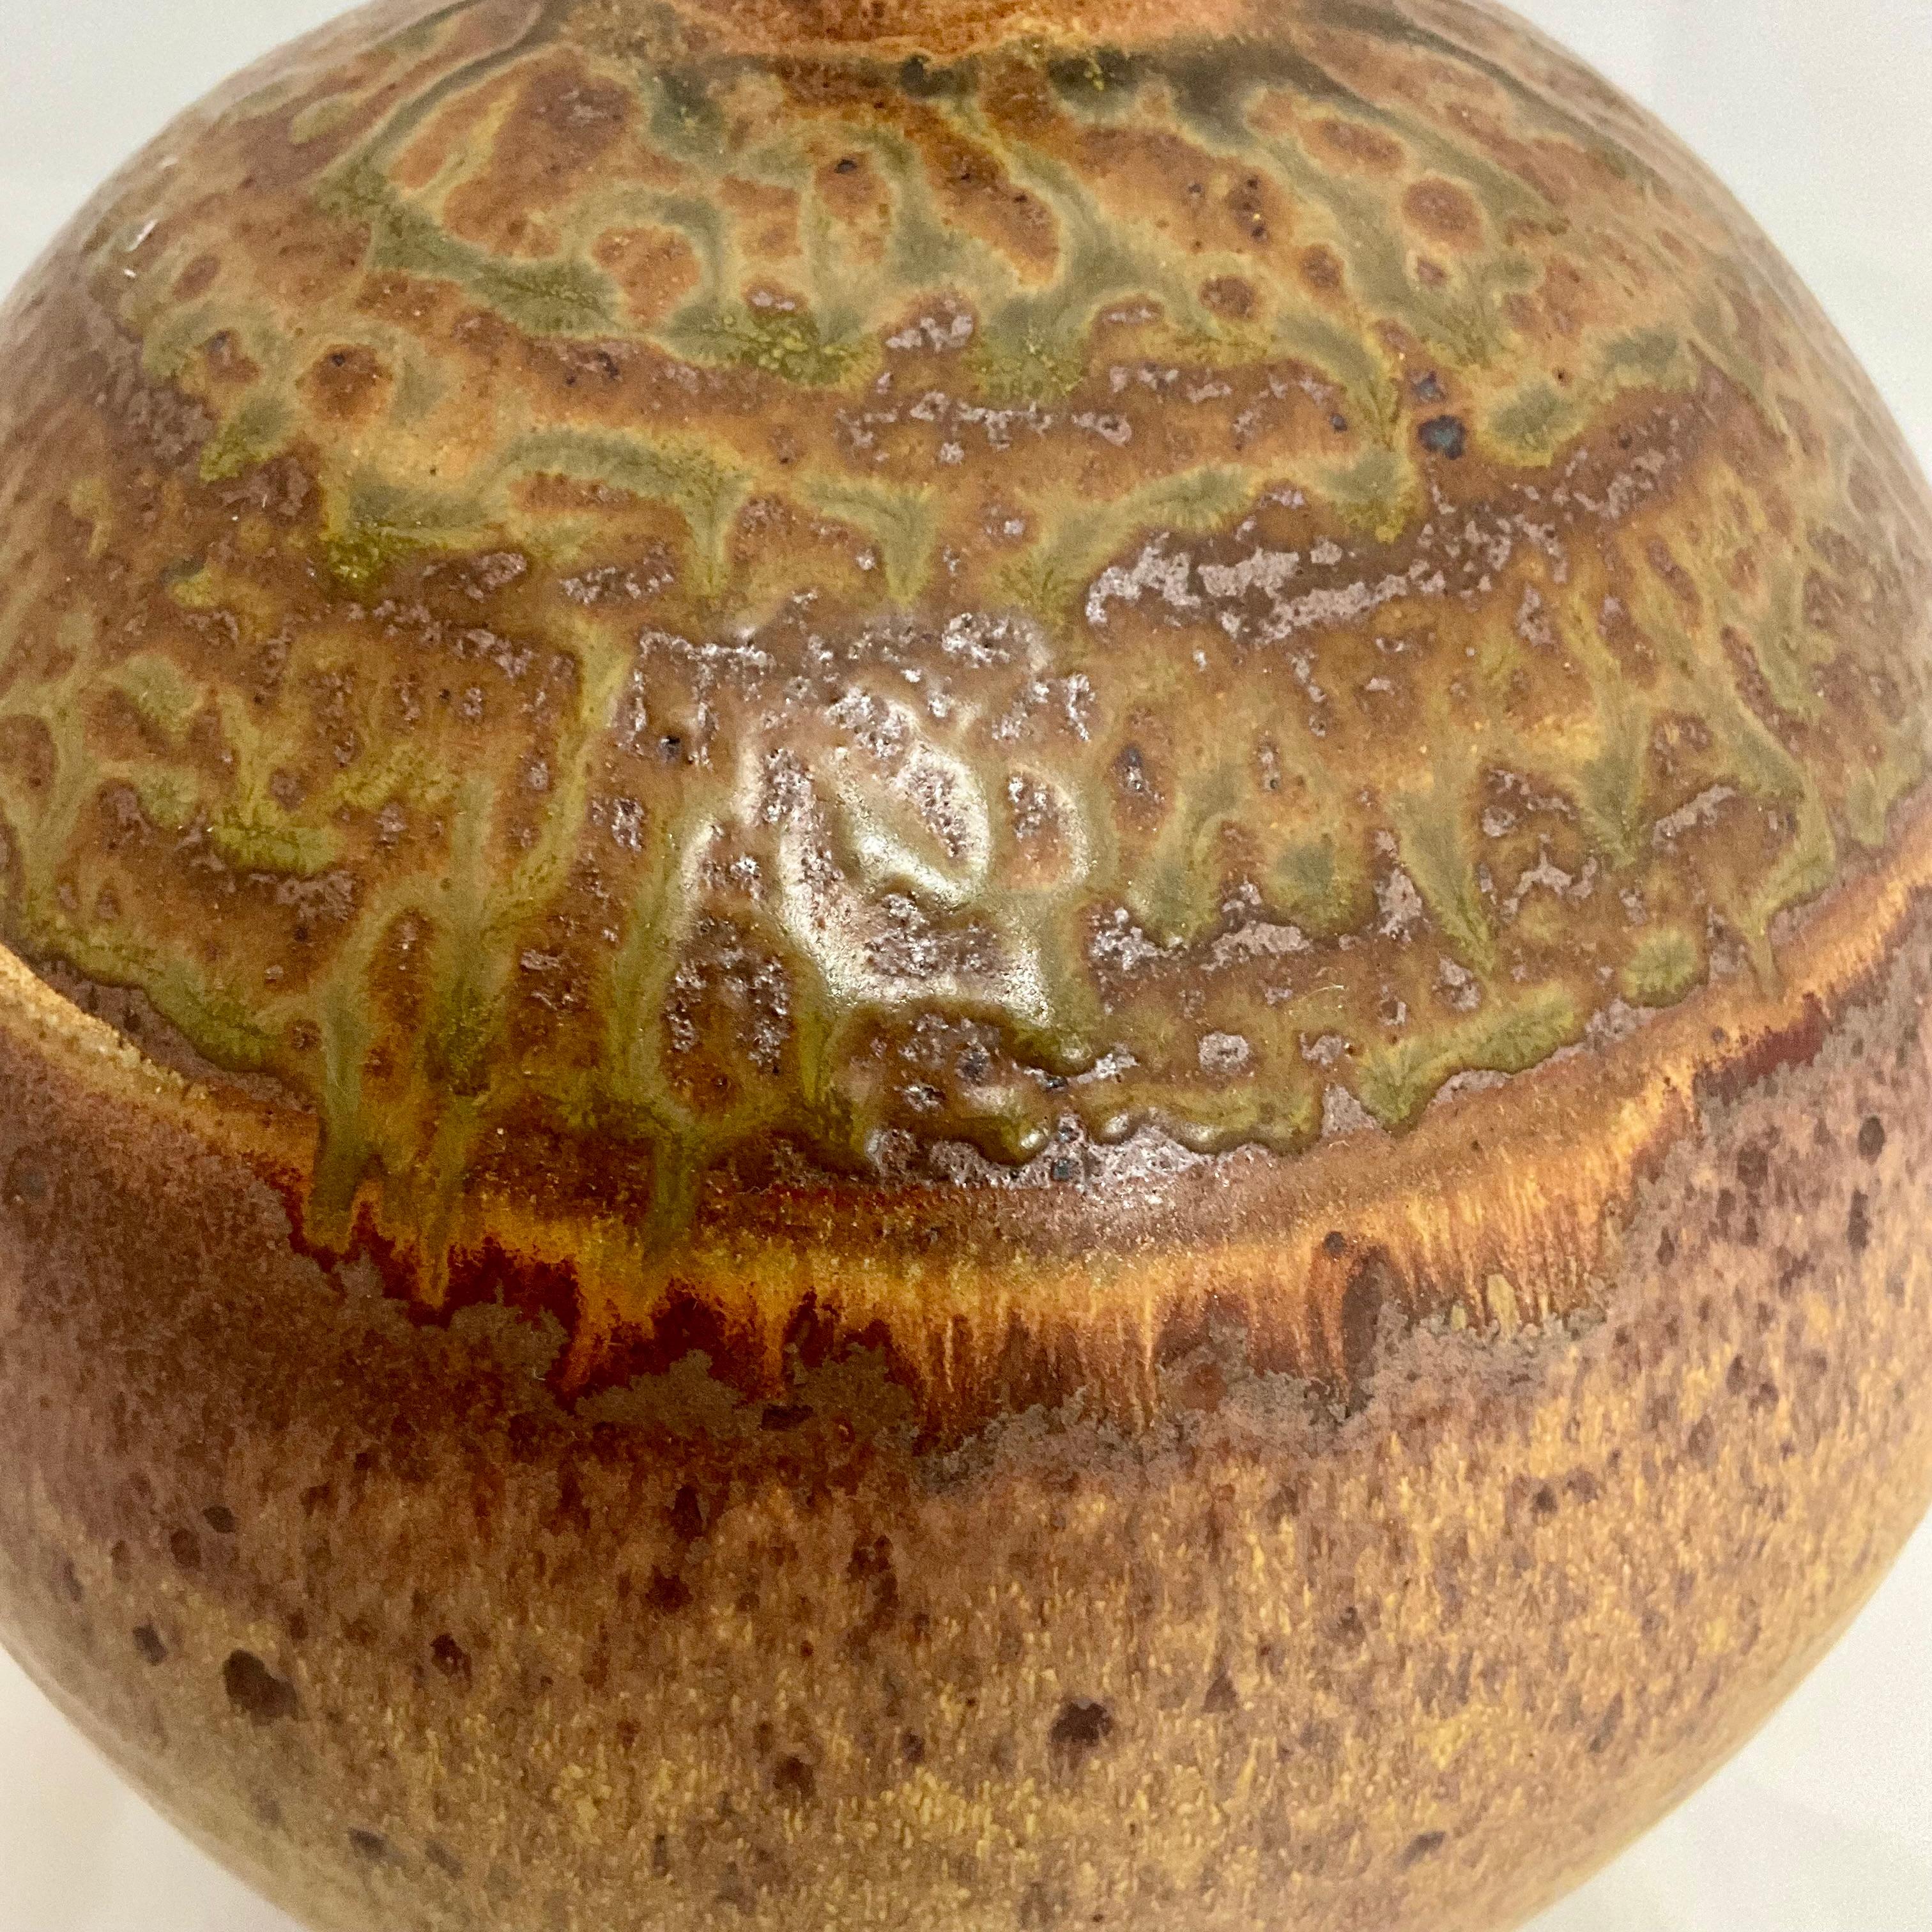 Larger mid century studio pottery vessel hand thrown in hues of mustard, brown and green, the colors darkening as they graduate to the top of the vase. This pieces is signed on the underside with an illegible signature.  No chips or cracks in